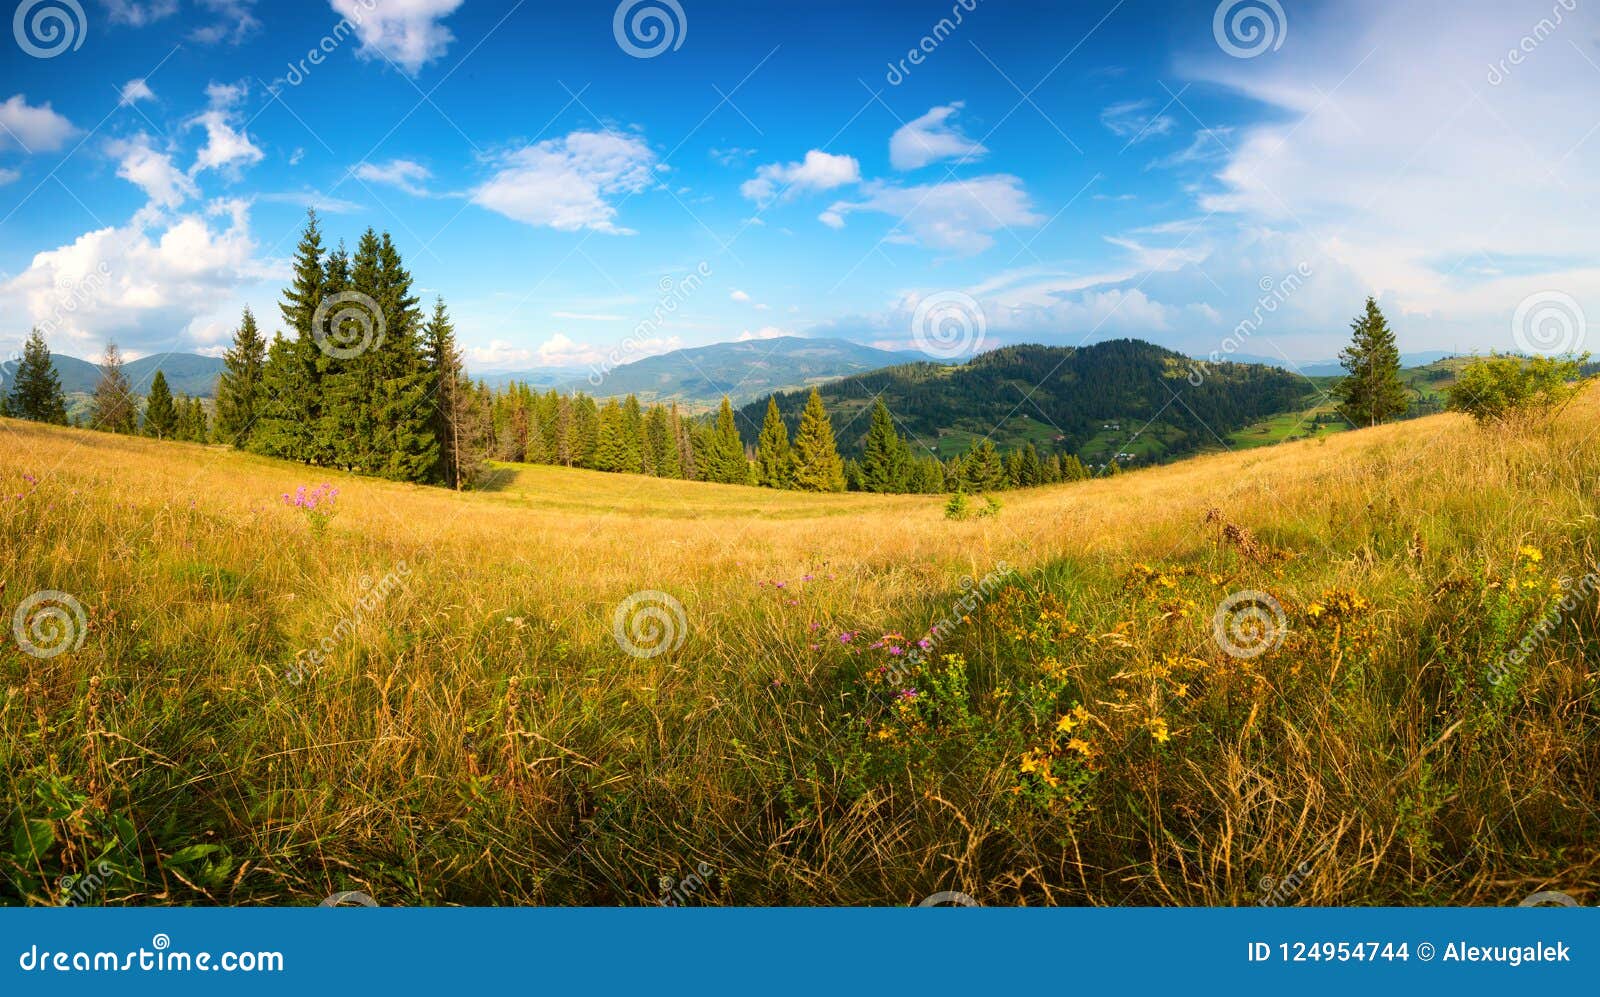 sunny summer landscape. summer hills of carpathians with wildflowers.